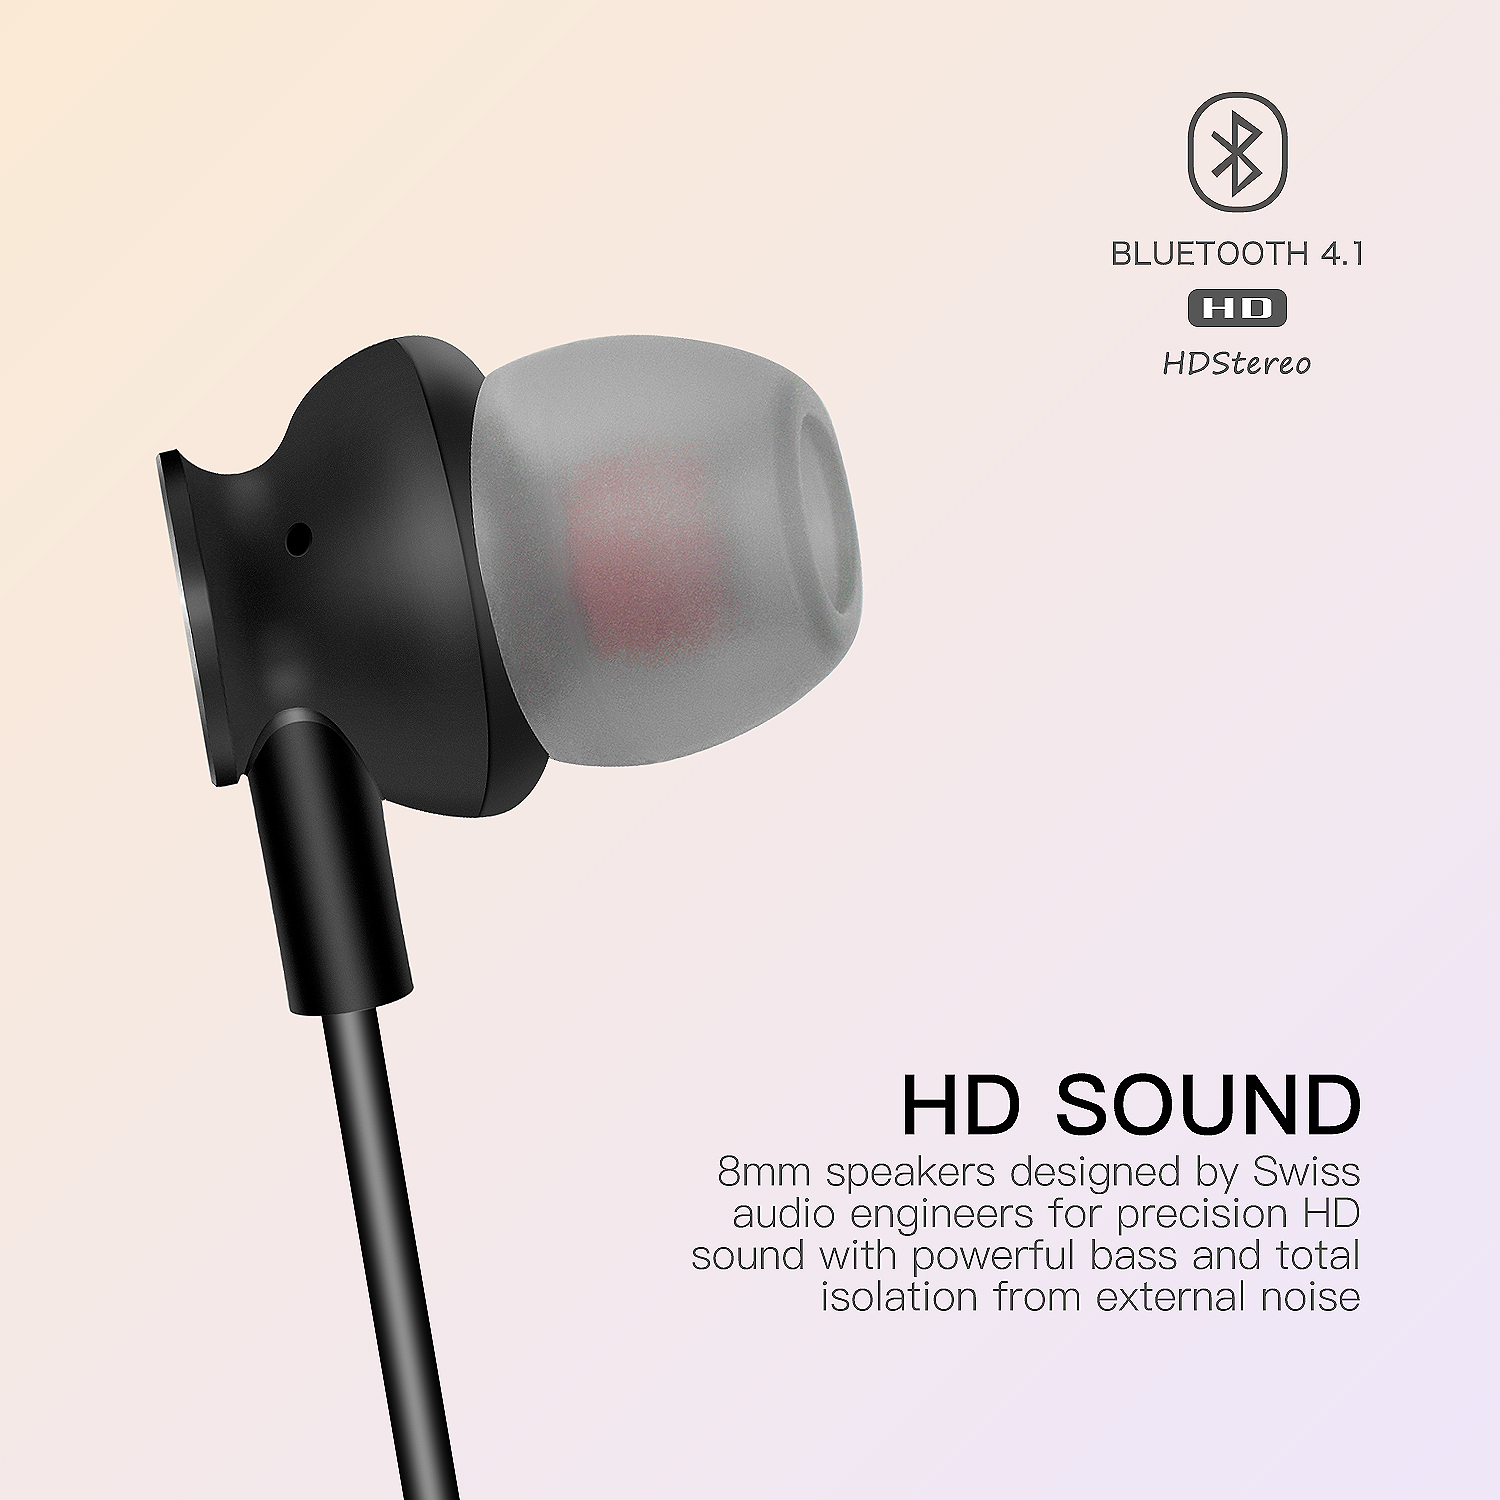 Wired bluetooth earbuds, HD sound with powerful bass New